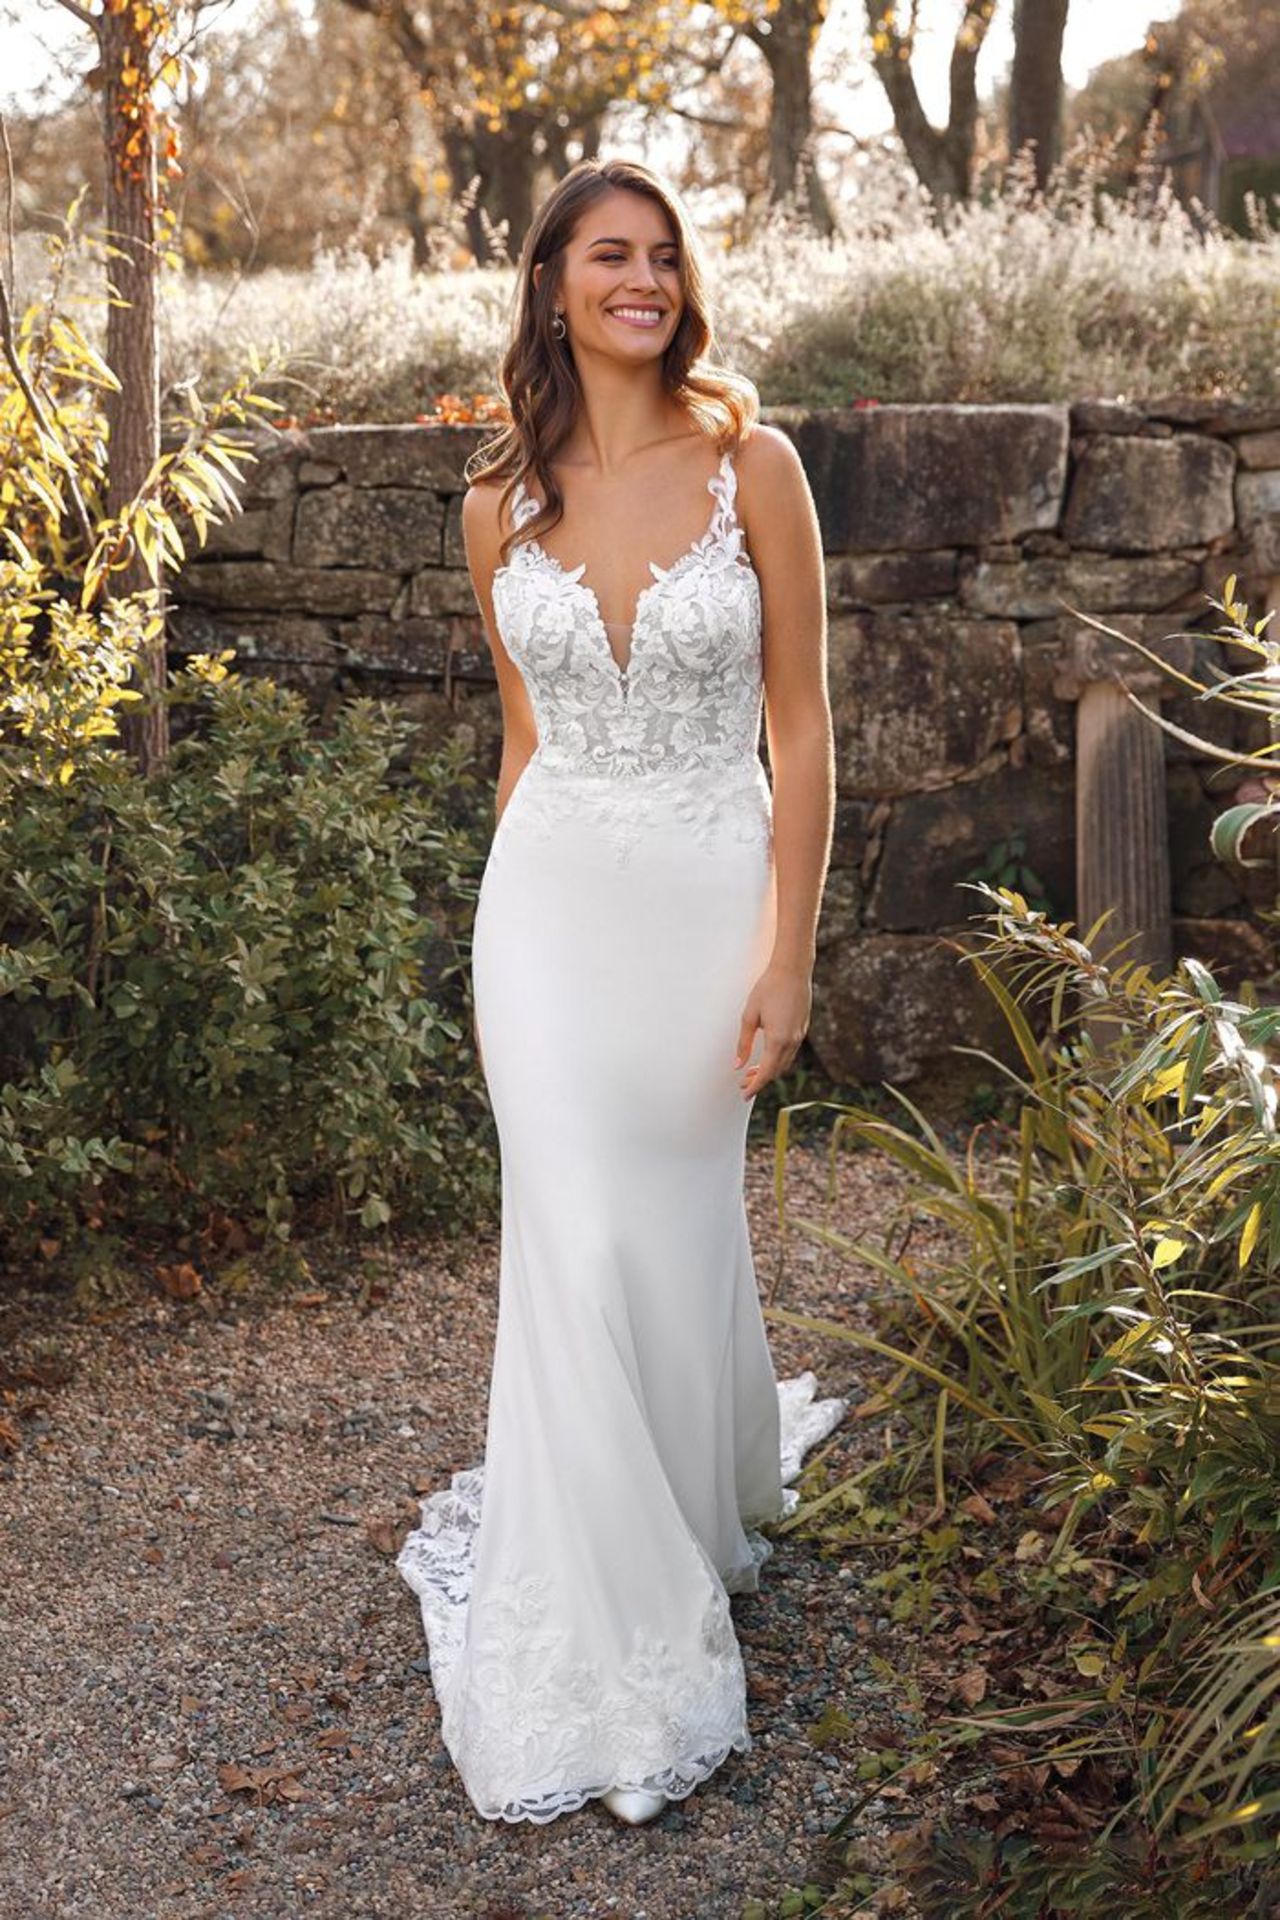 1 x Justin Alexander Alivia Designer Crepe Wedding Gown With Cathedral Train - Size 12 - RRP £1,654 - Image 10 of 14